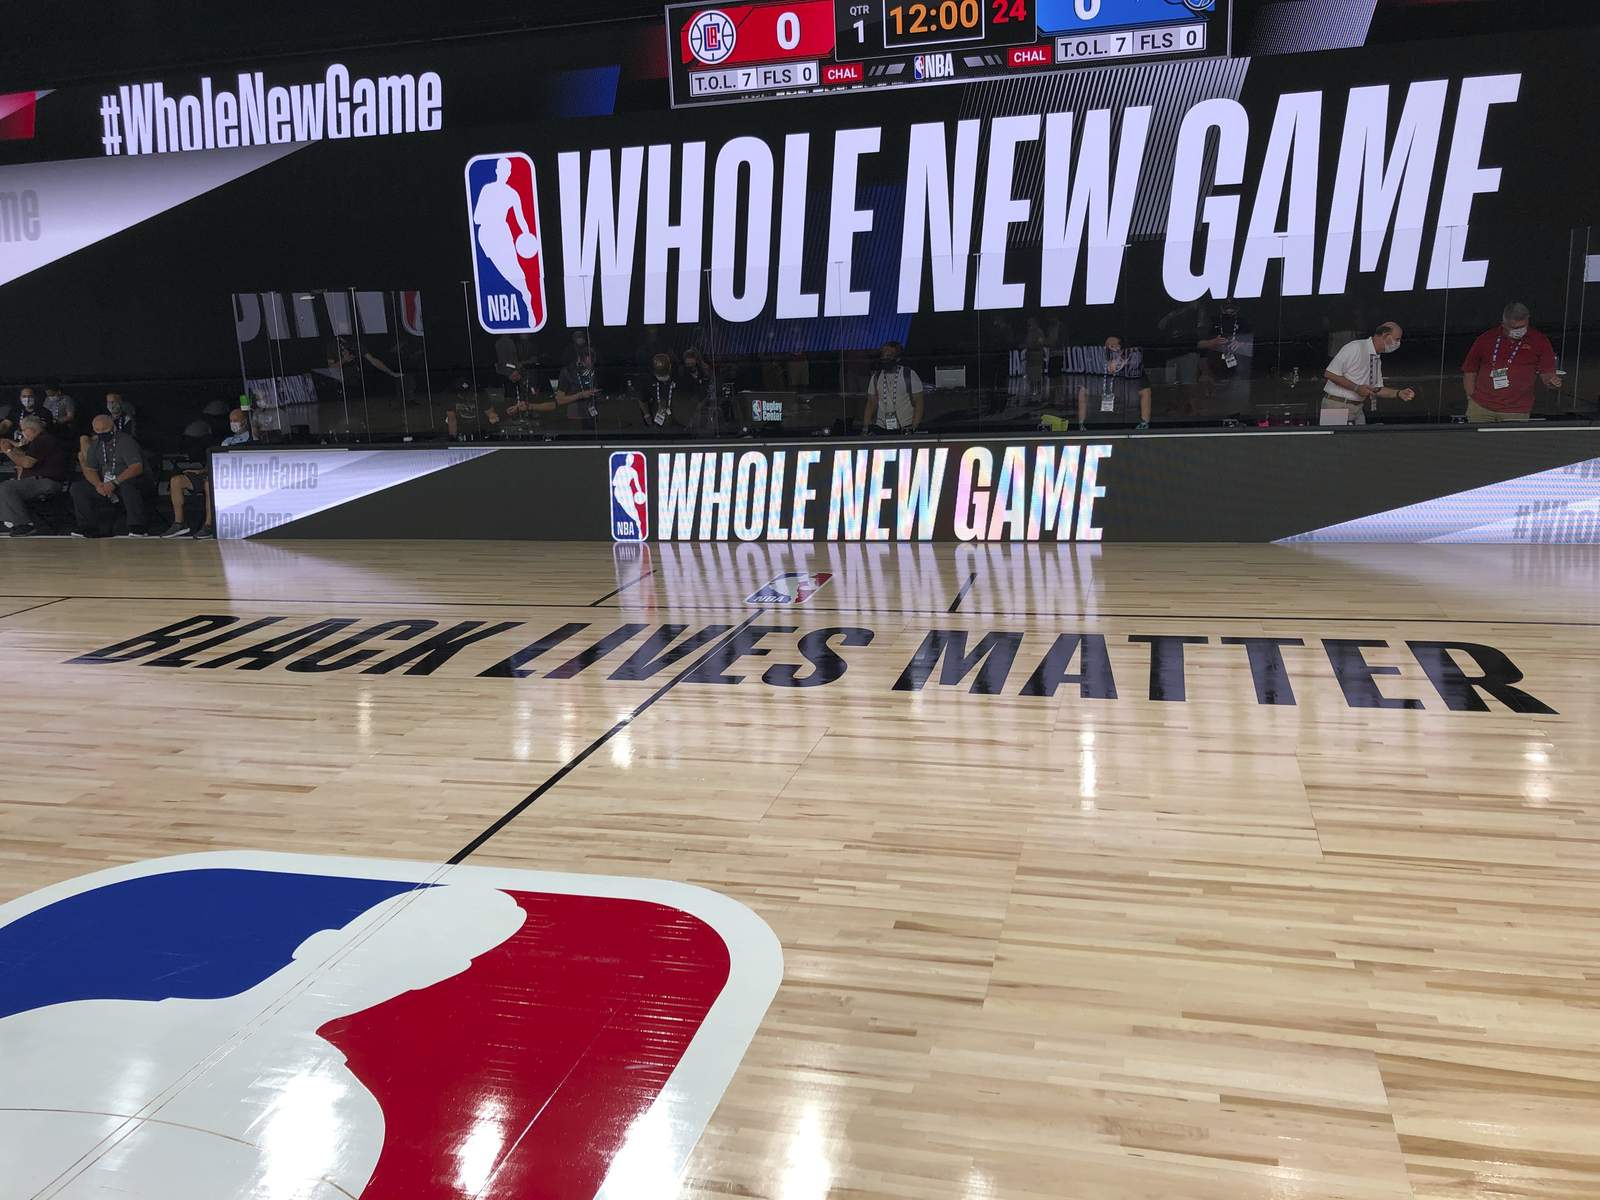 Voting for the 2019-20 NBA Award underway